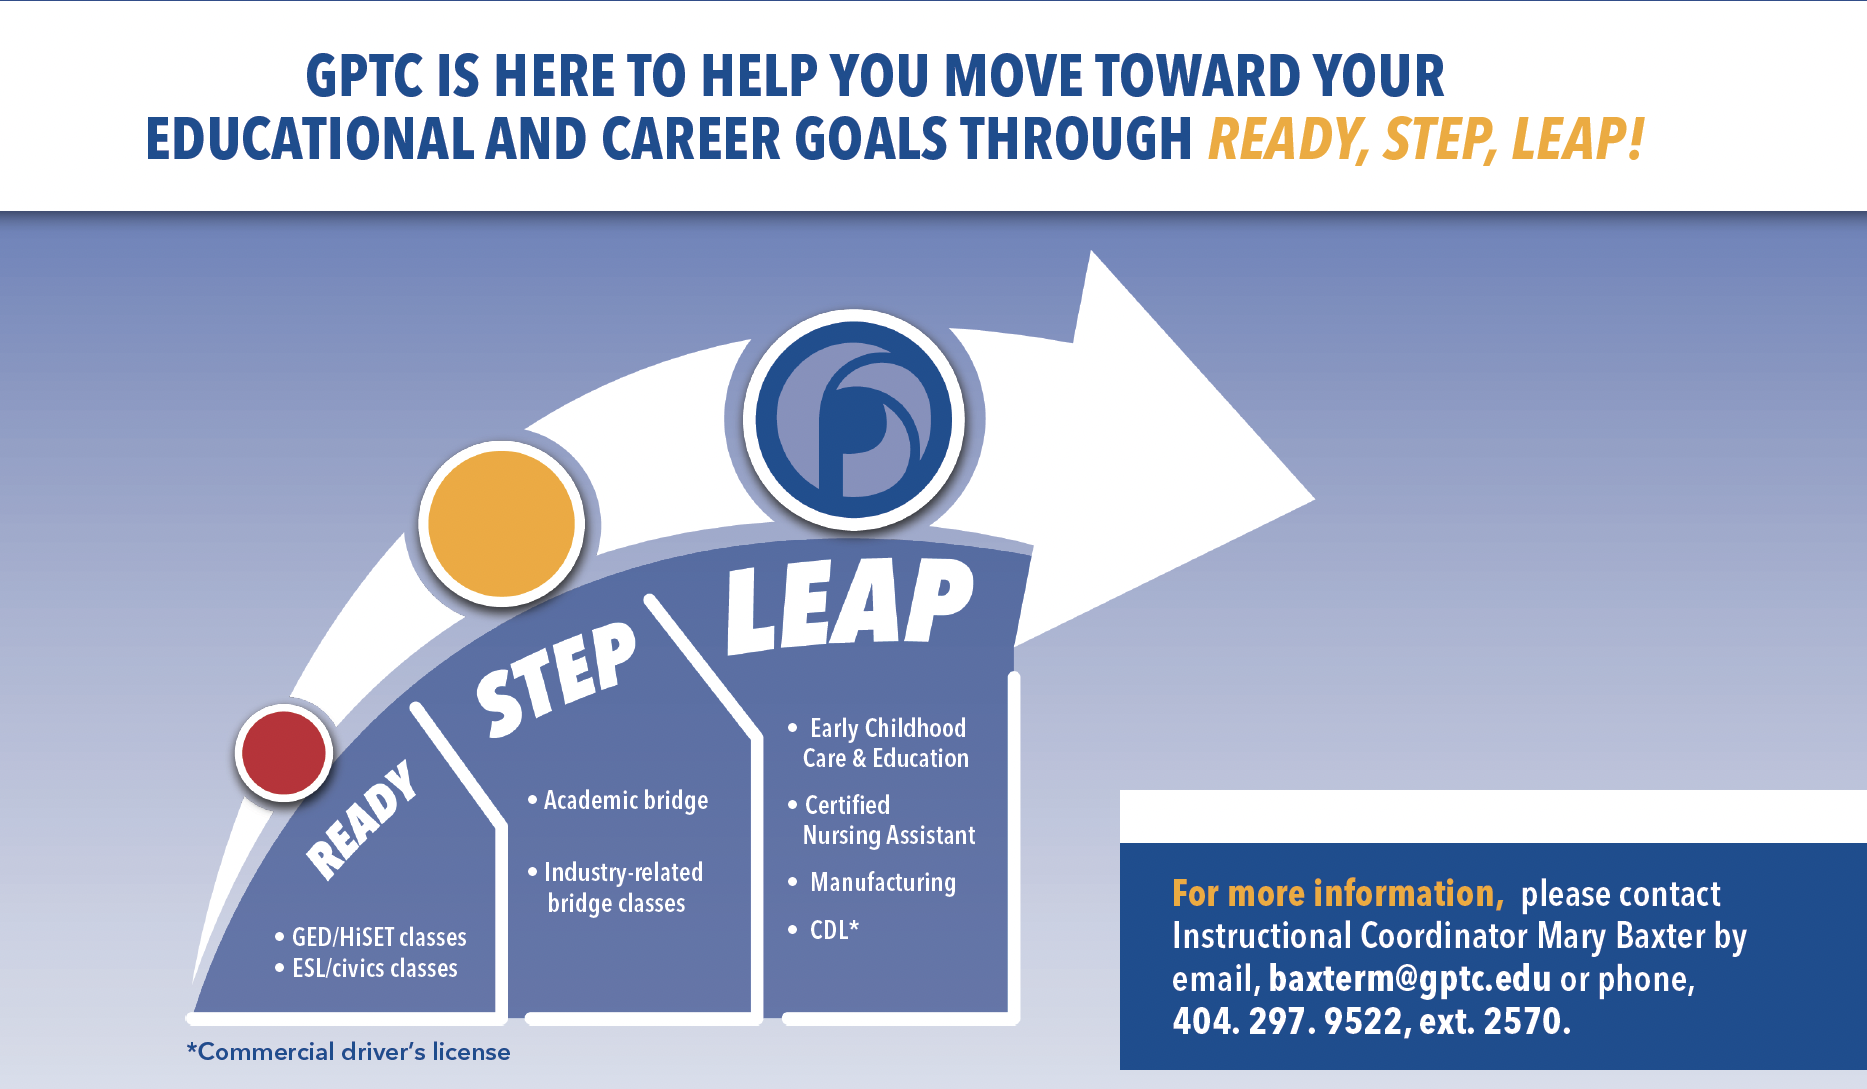 Ready, Step, Leap graphic that describes the programs and offerings